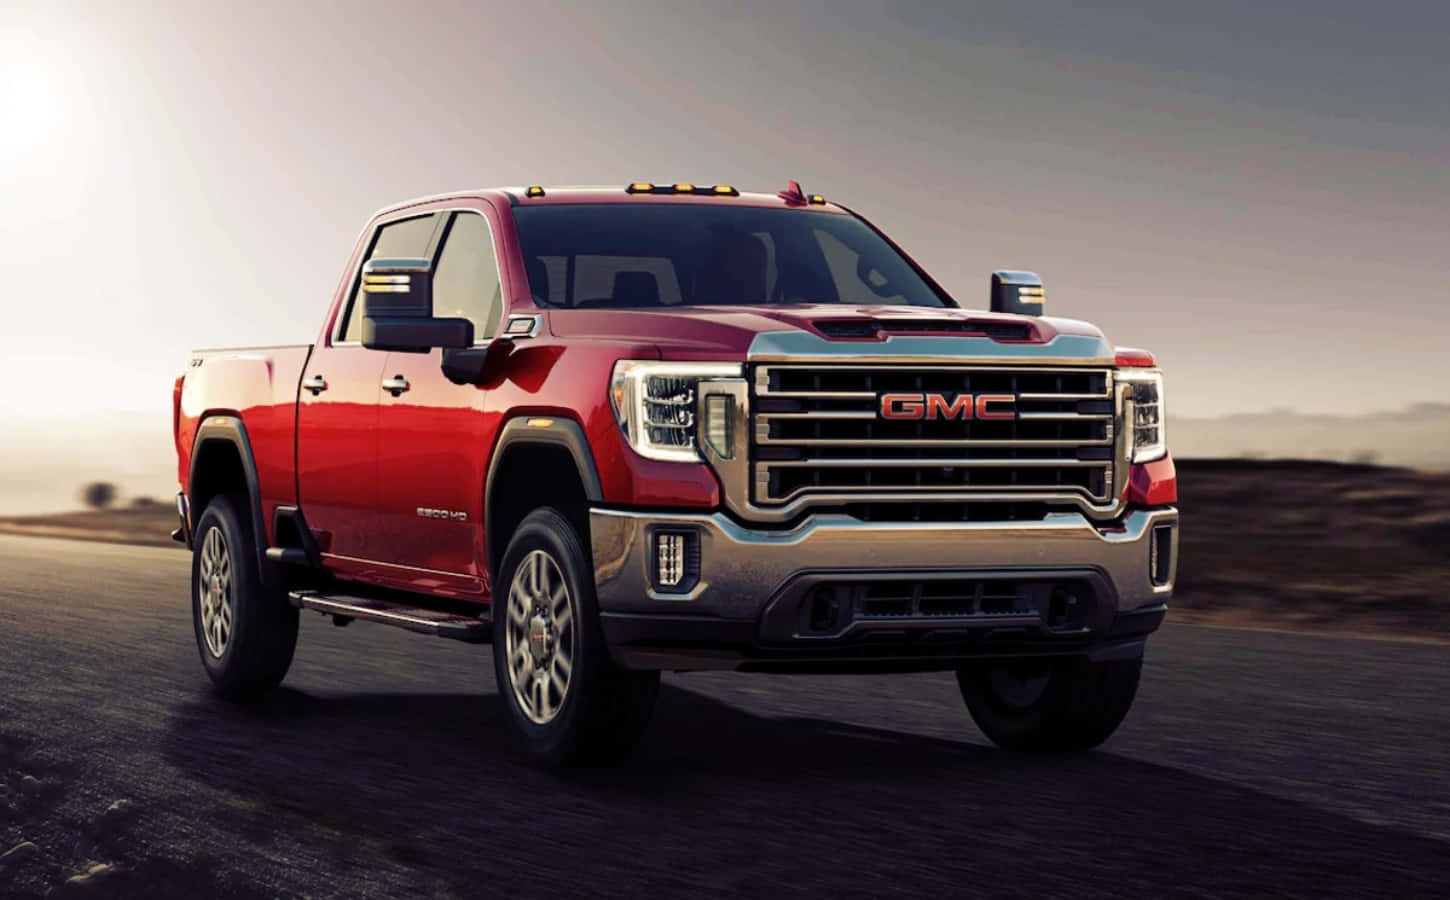 Gmc Pictures